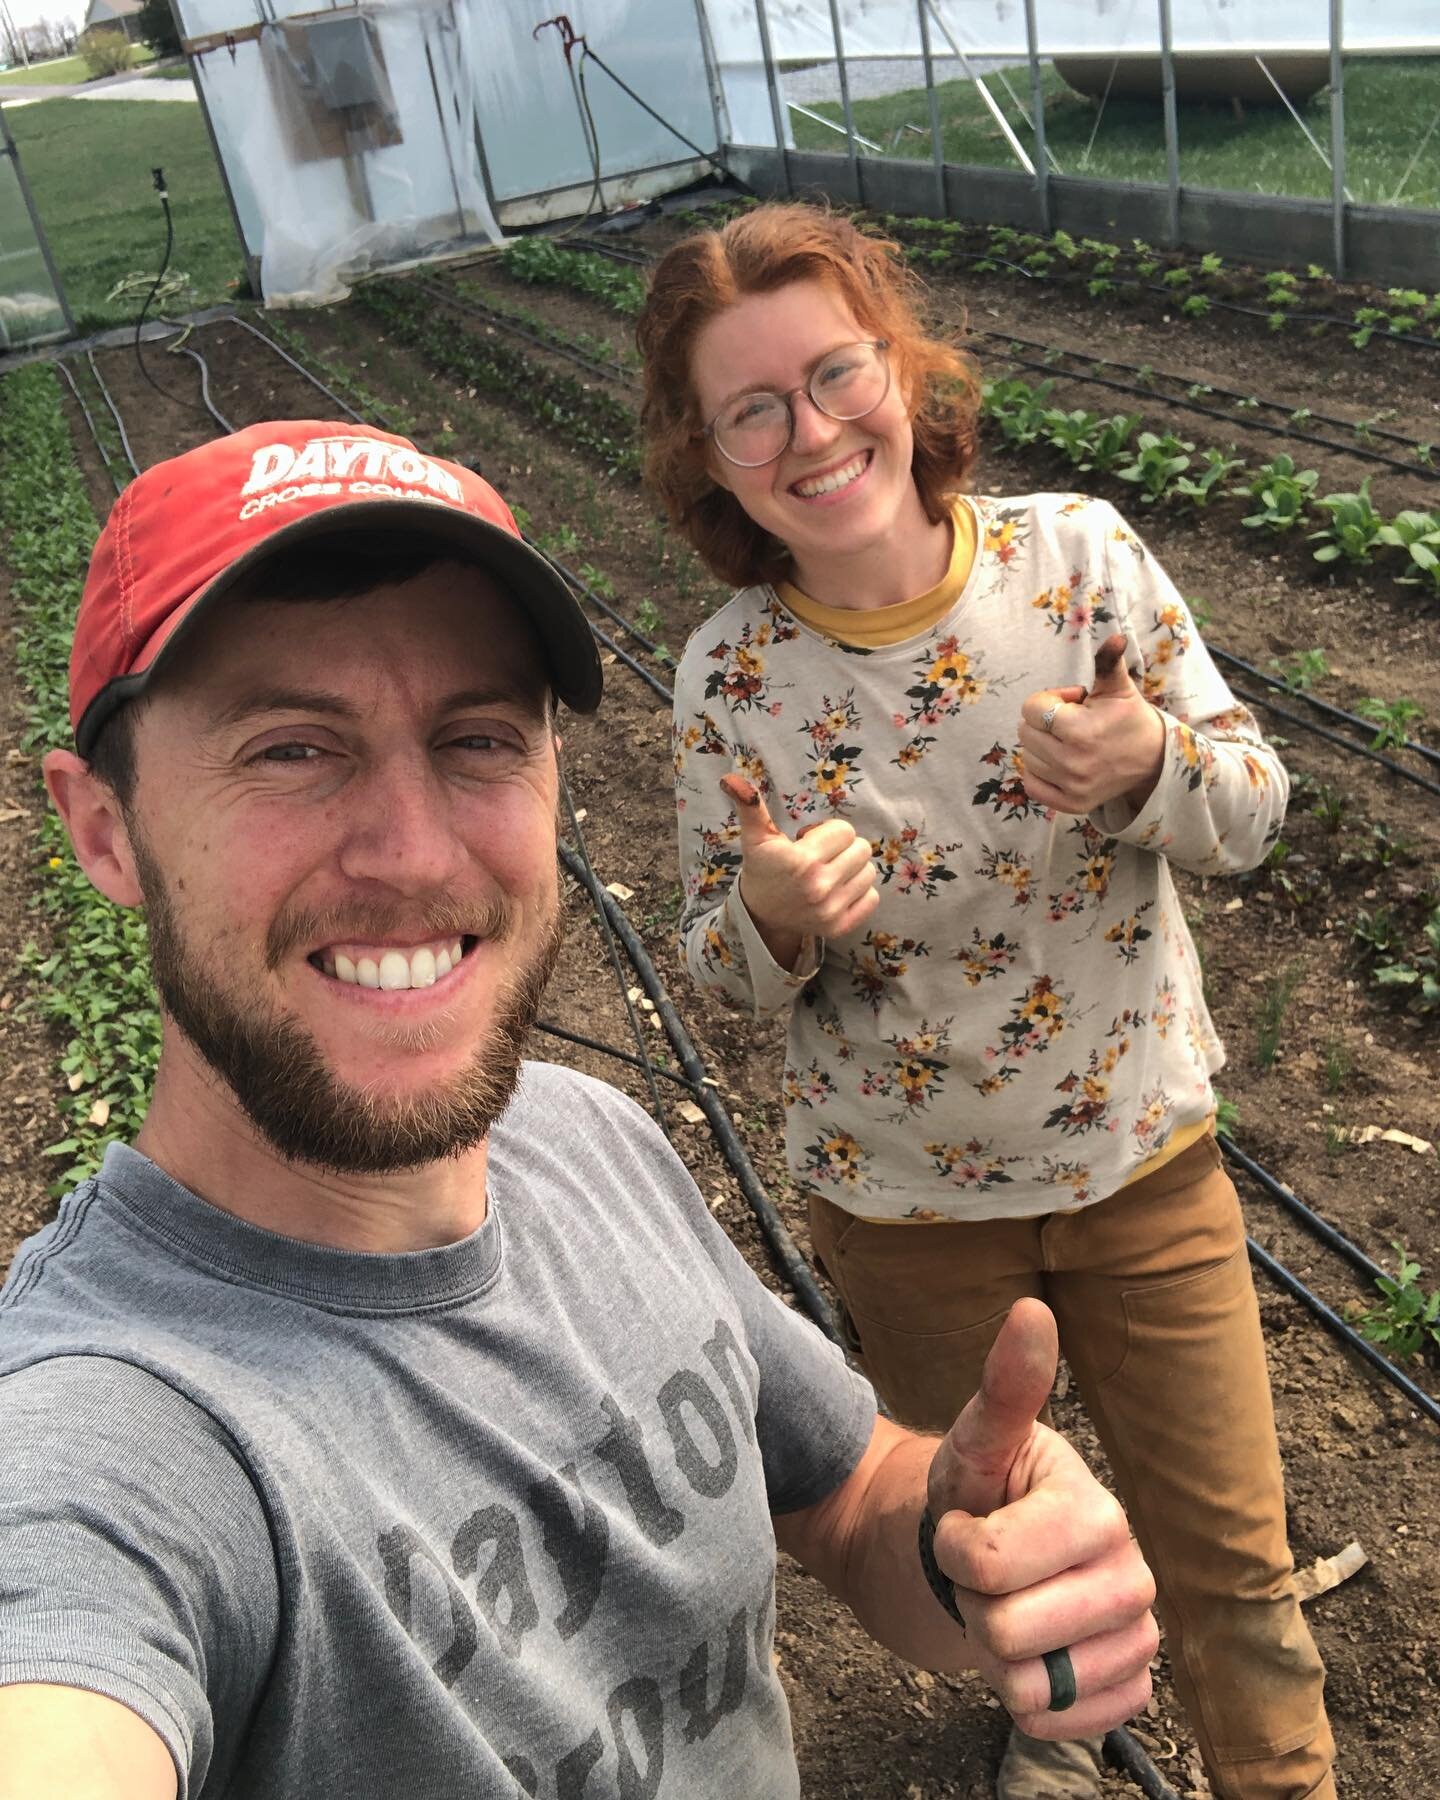 500 tomatoes in an hour! Tons of tomatoes in the big greenhouse today - our earliest planting ever for them and we are pretty excited about it. 🍅😍🍅